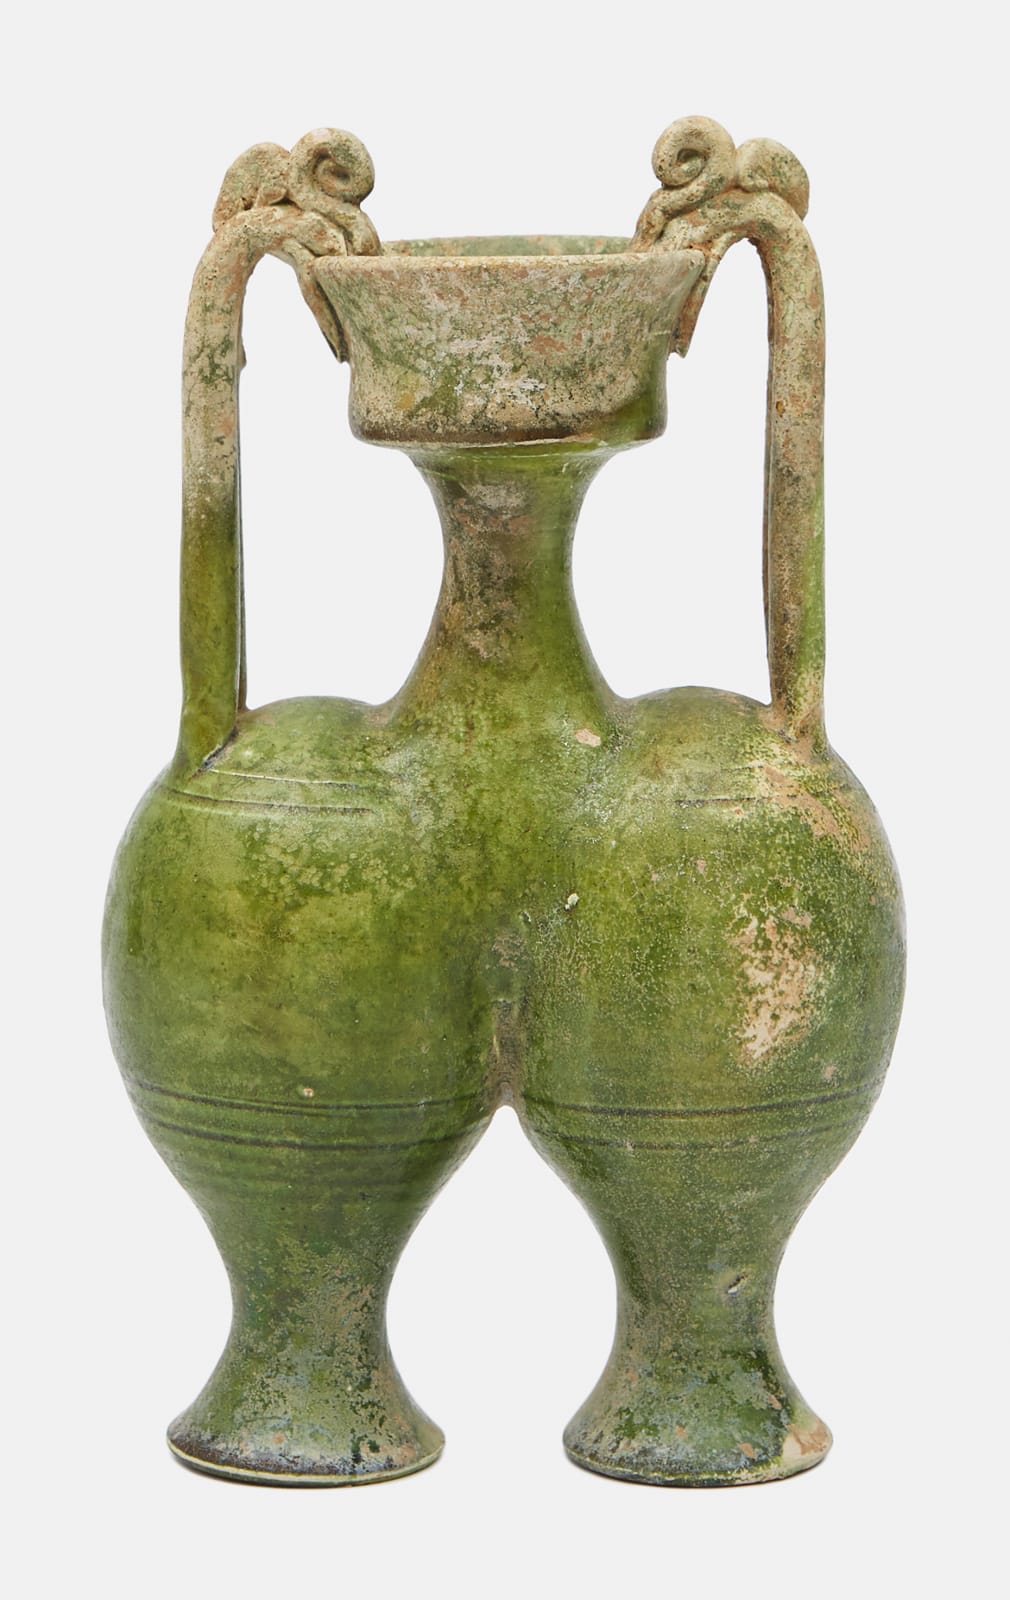 Anon, A Chinese green-glazed conjoined amphora, Sui dynasty, 7th century